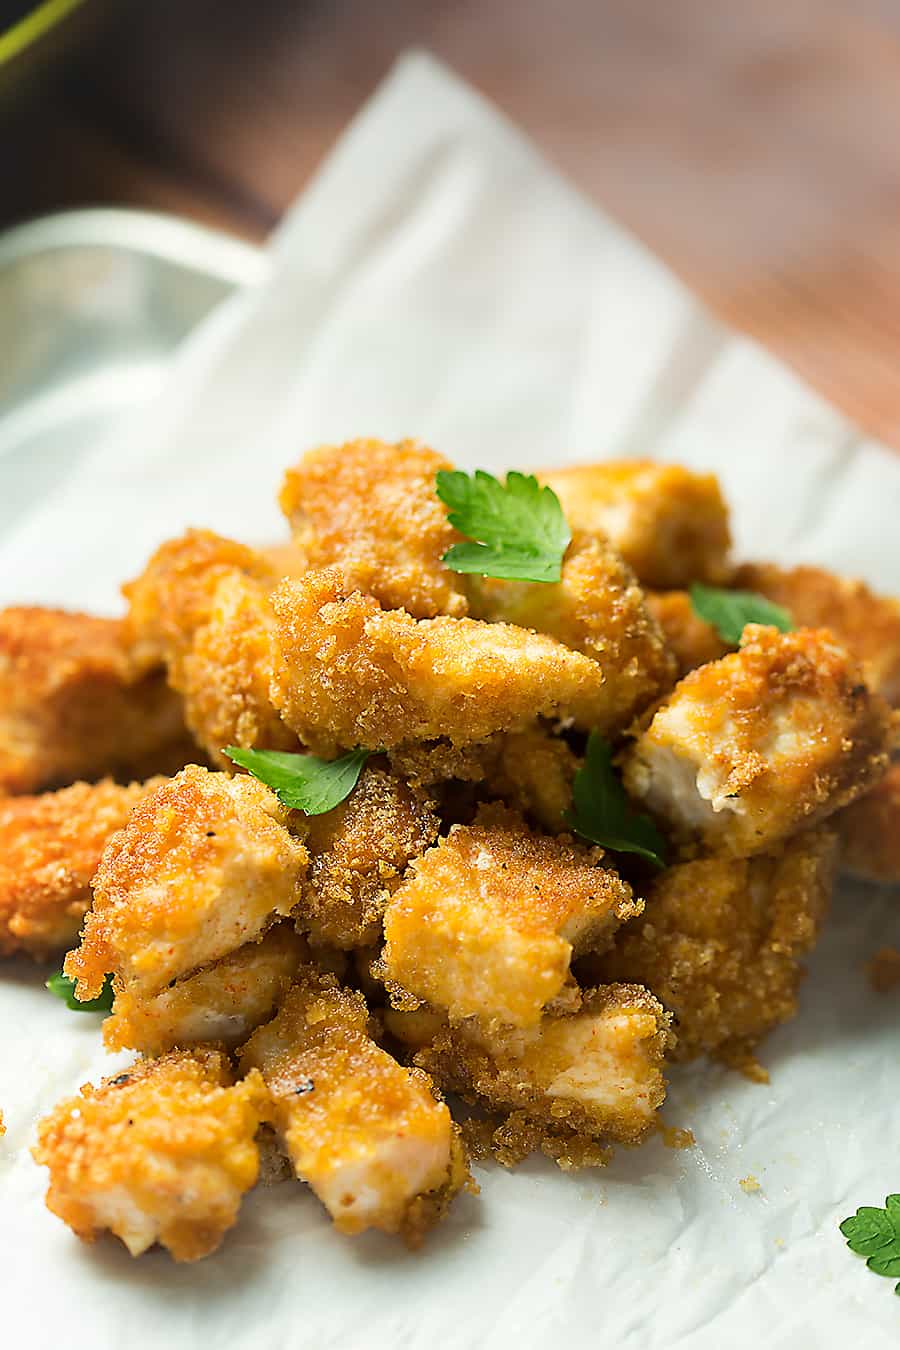 Crunchy pork rinds, smoky seasoning, and juicy chicken...these pork rind crusted chicken nuggets are so flavorful and easy to make. My kids love them!